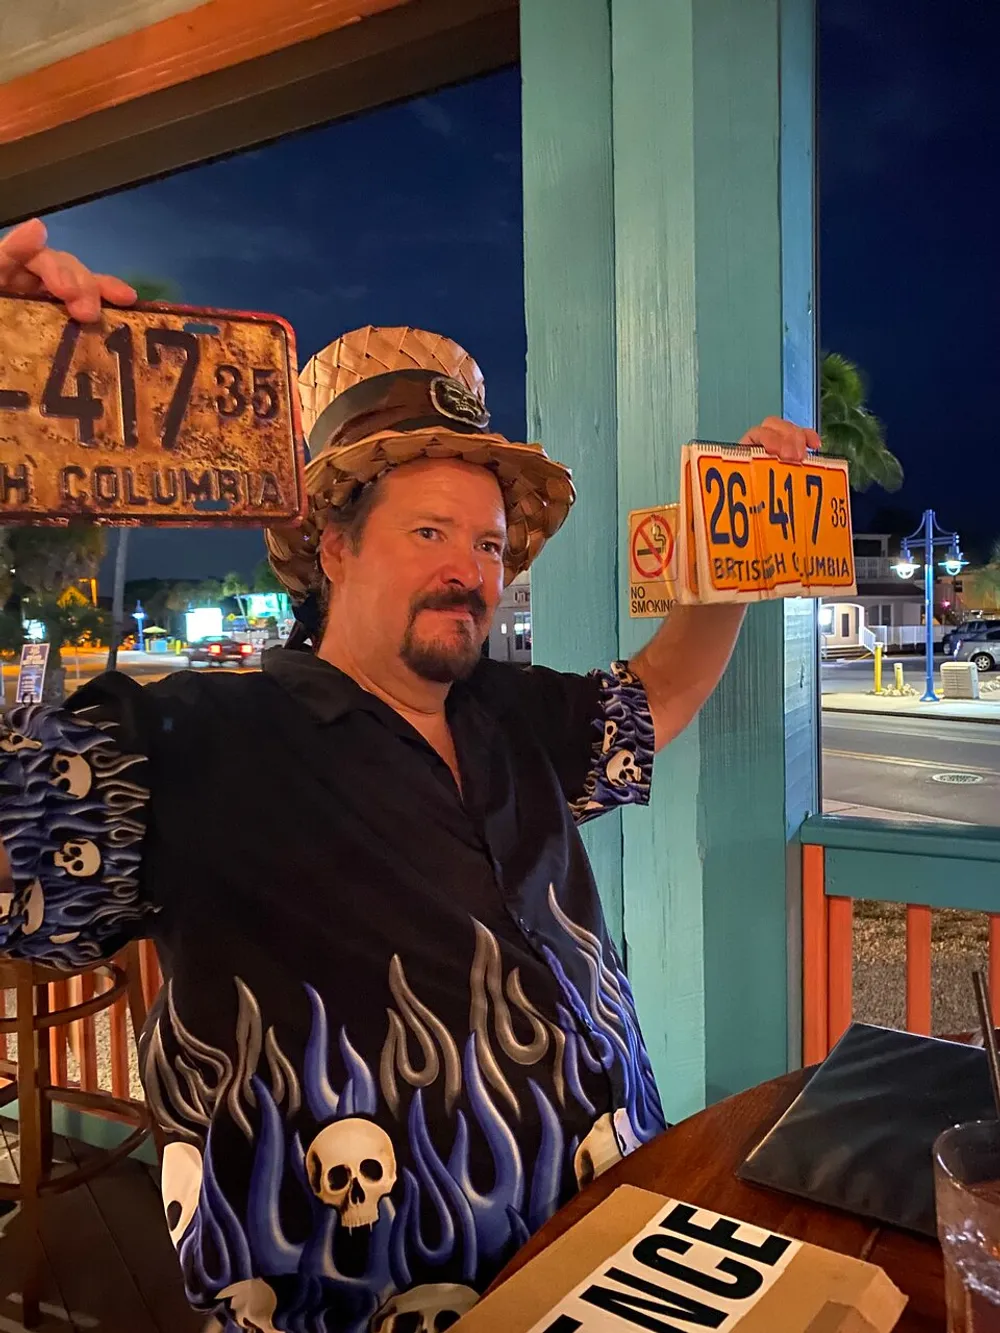 A person wearing a puffy pirate hat and a flame-pattern shirt with skull motifs is holding up two weathered license plates from British Columbia